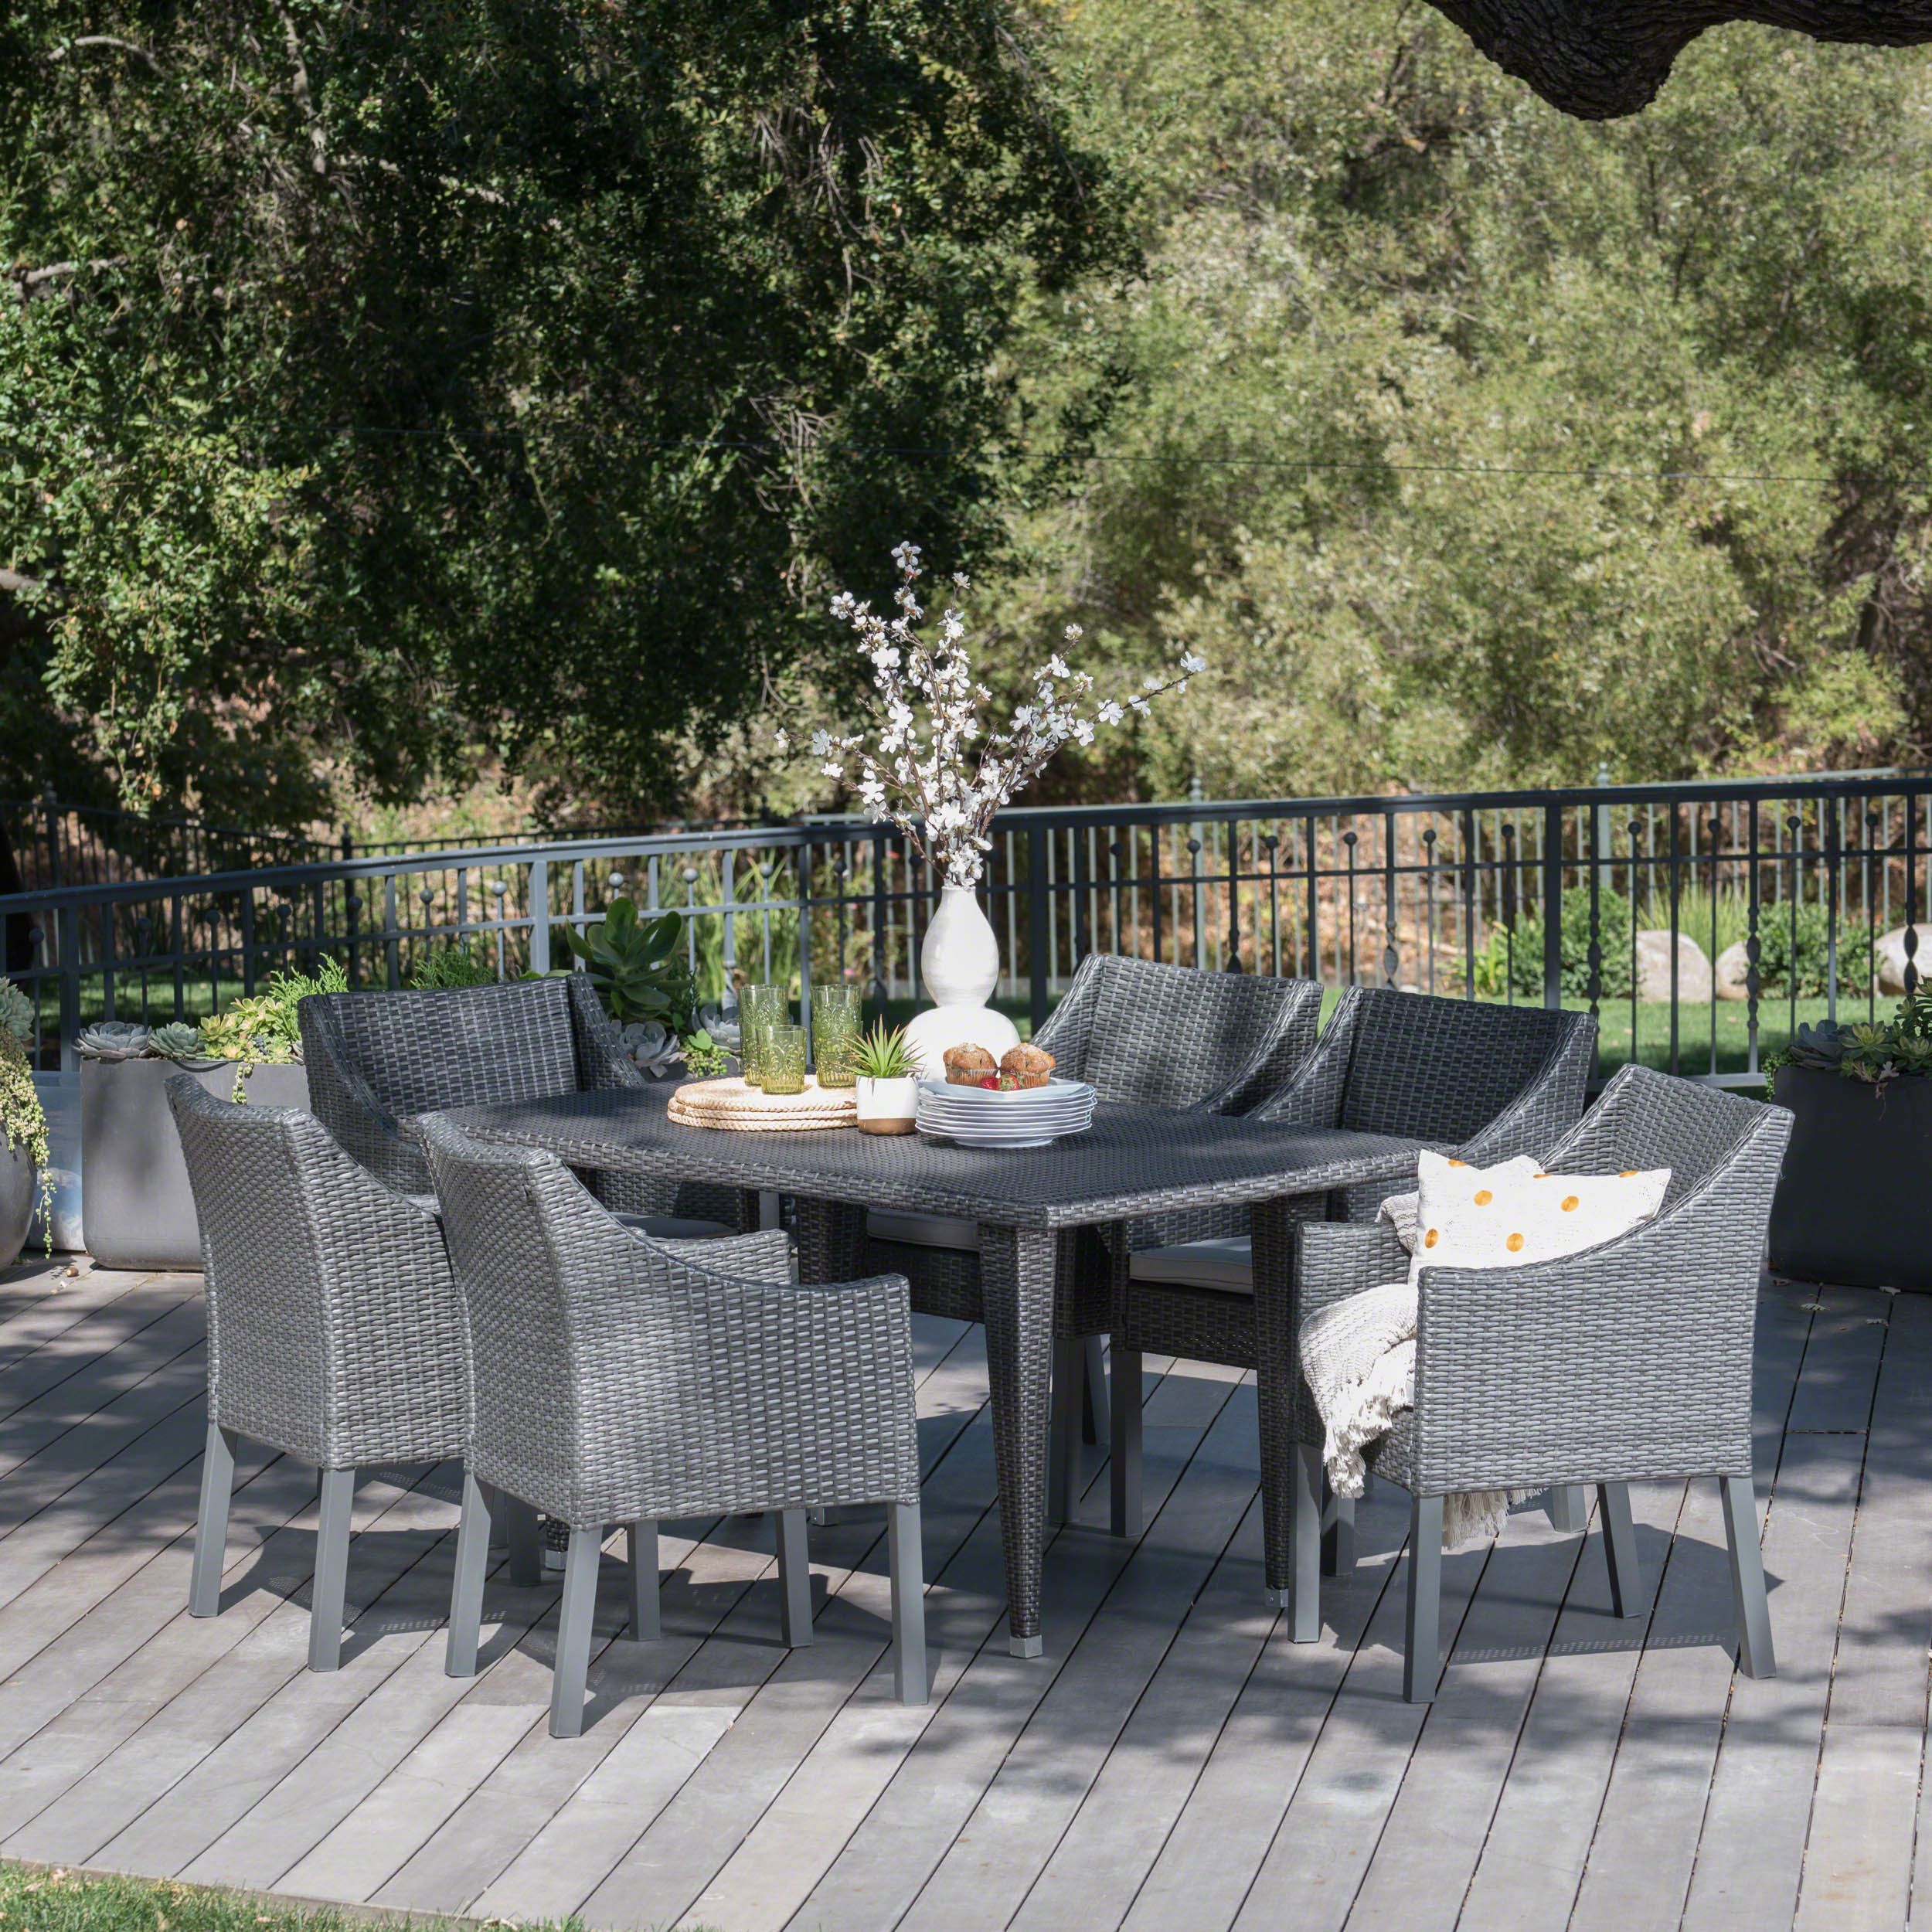 Alanna Outdoor 7 Piece Wicker Rectangular Dining Set With Water Intended For 7 Piece Patio Dining Sets With Cushions (View 11 of 15)